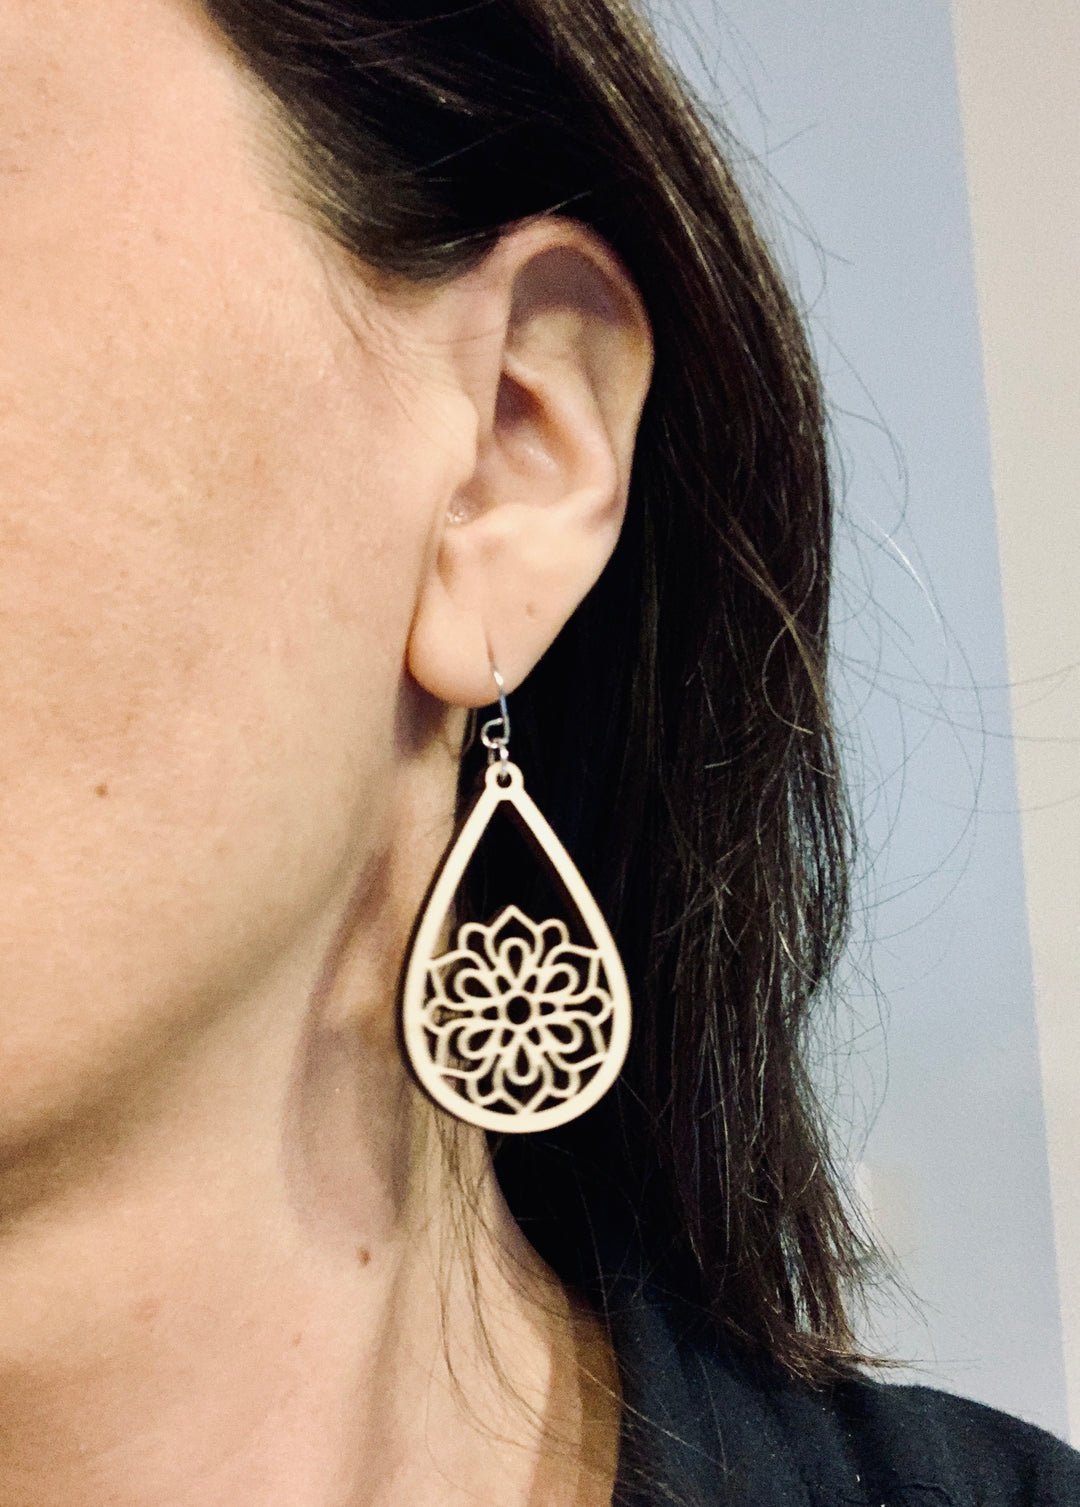 Bursts Of Joy - Laser Engraved USA Hand-Made Earrings (Maple Wood)